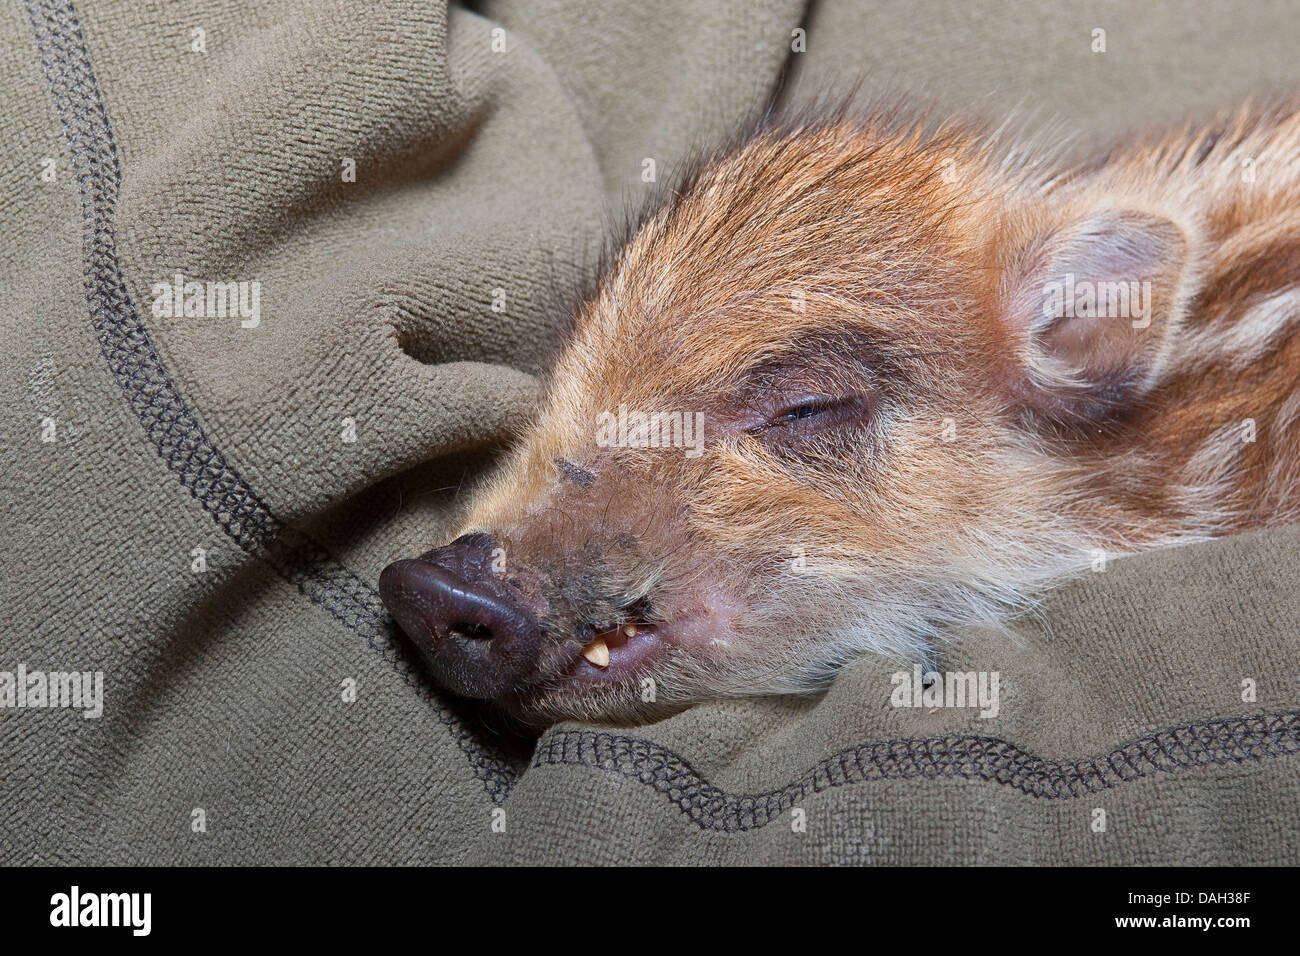 wild boar, pig, wild boar (Sus scrofa), orphaned tame runt lying in ones arms, Germany Stock Photo